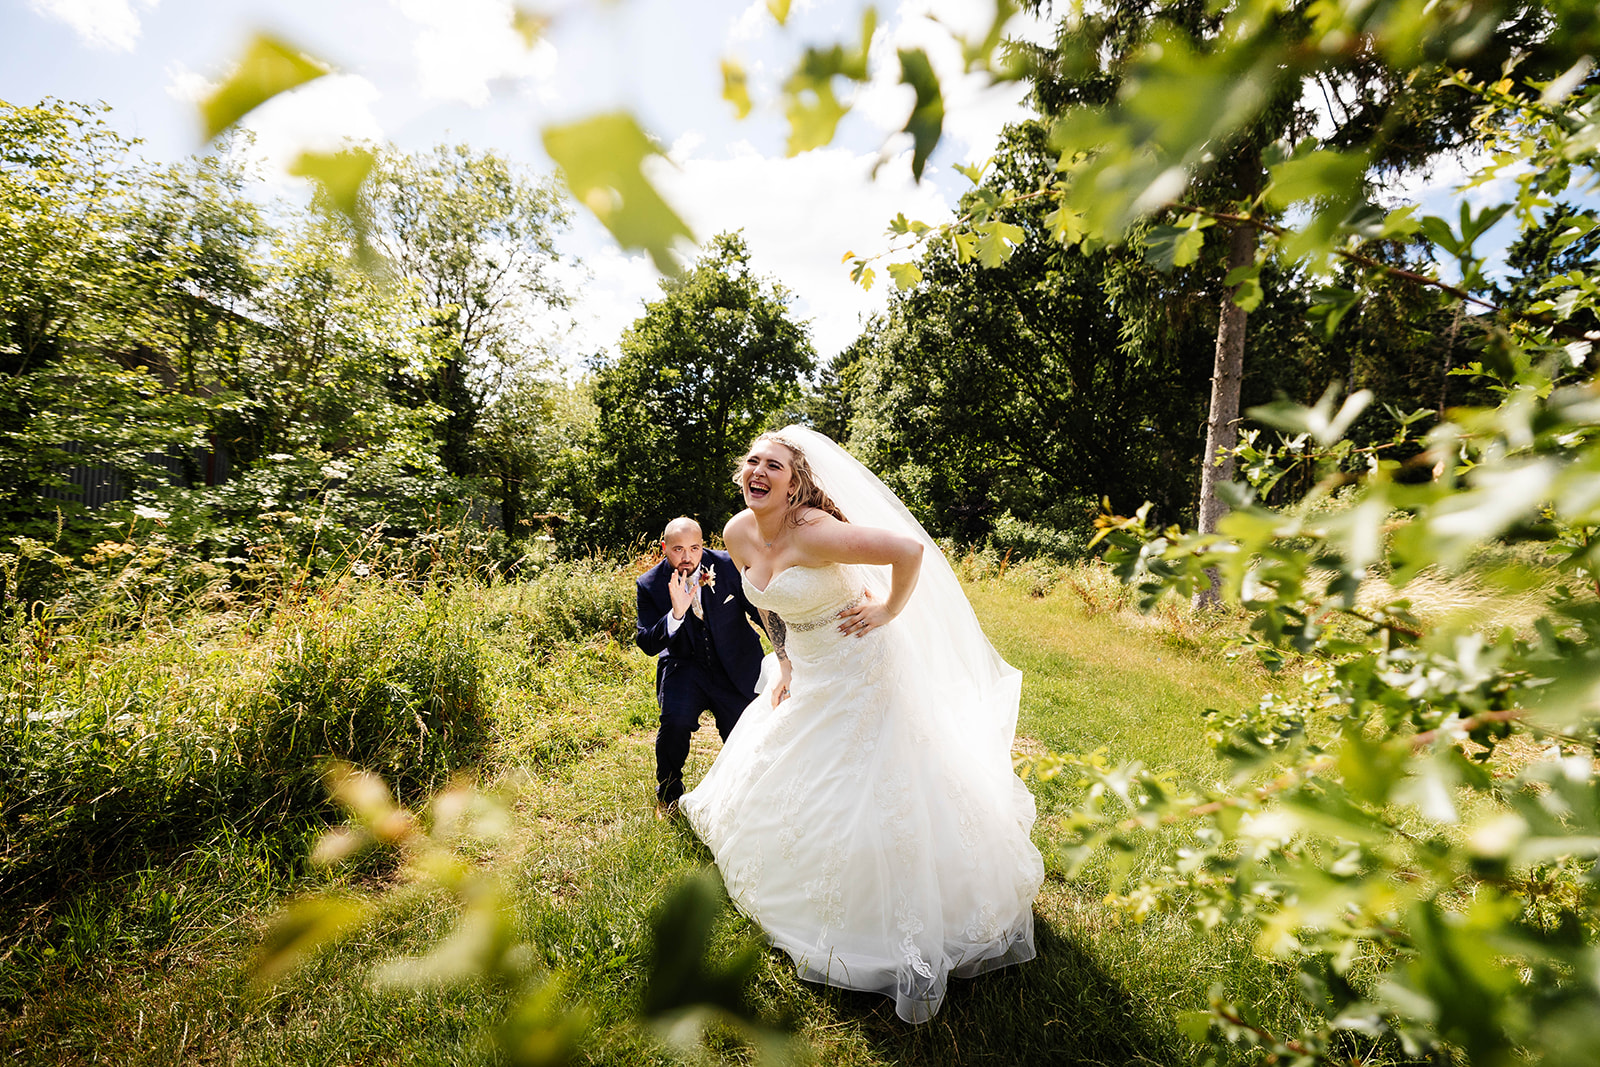 Couple walking through wooded area, groom is posing and the bride is laughing 